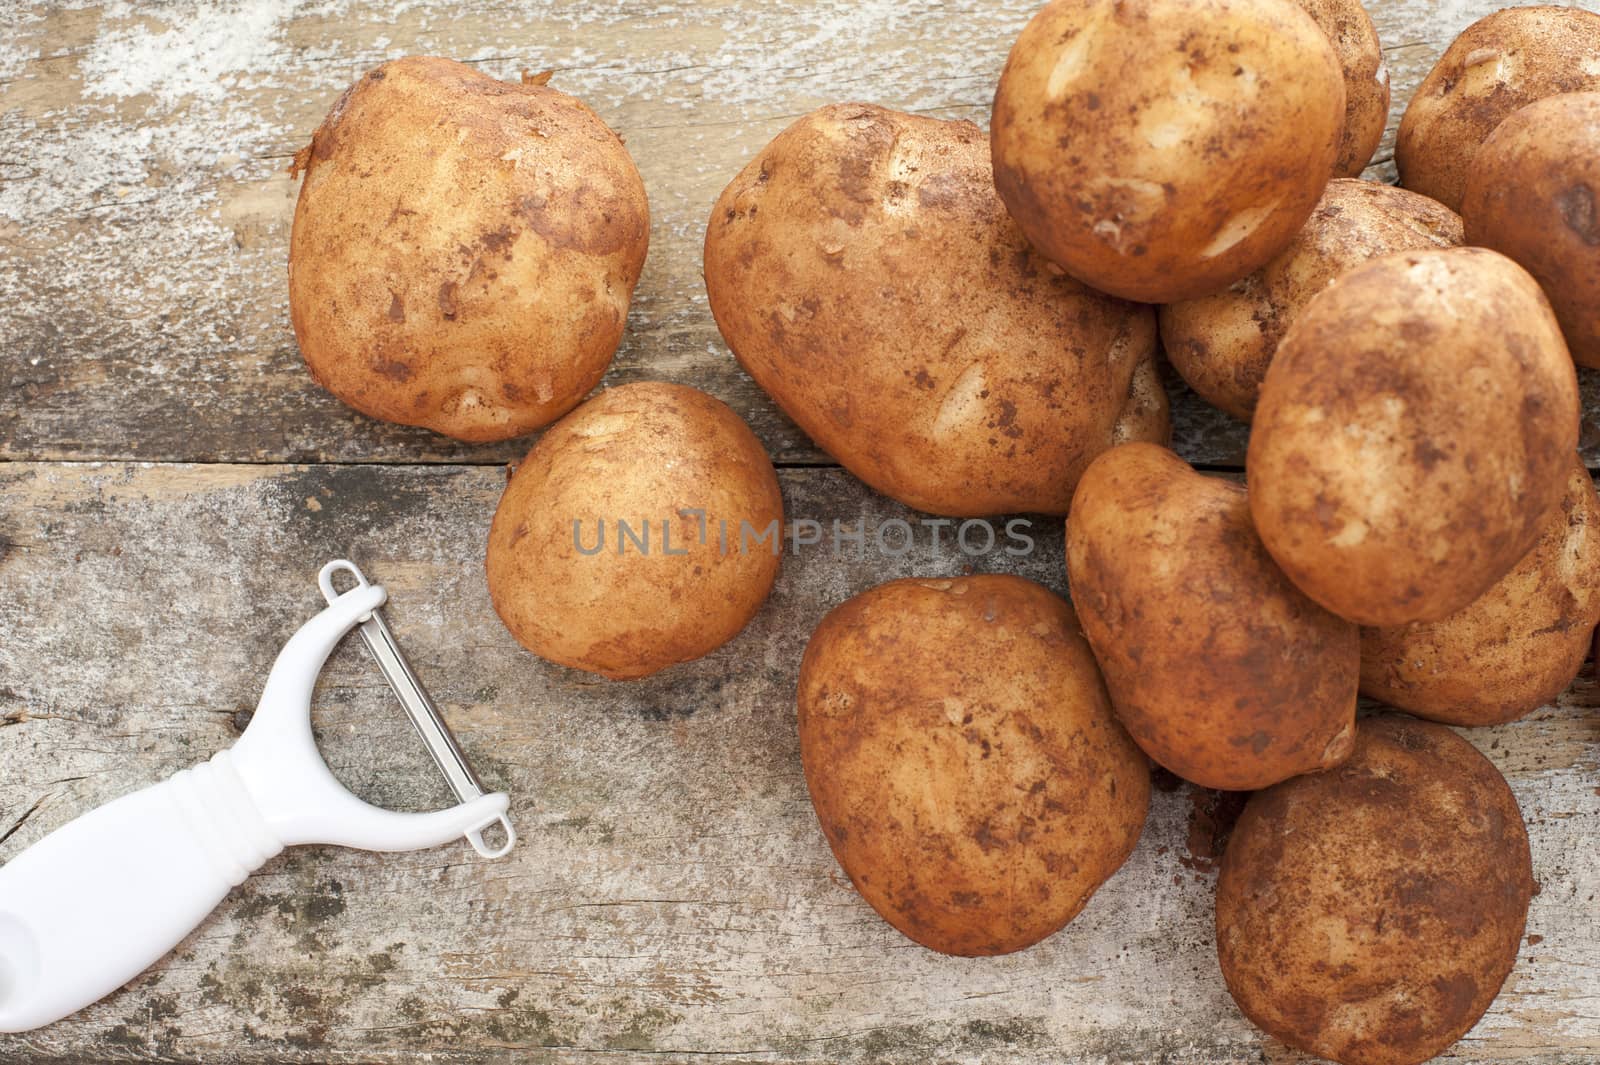 Pile of farm fresh potatoes still with adhering dirt and a manual peeler lying on a rustic background ready to prepare for dinner